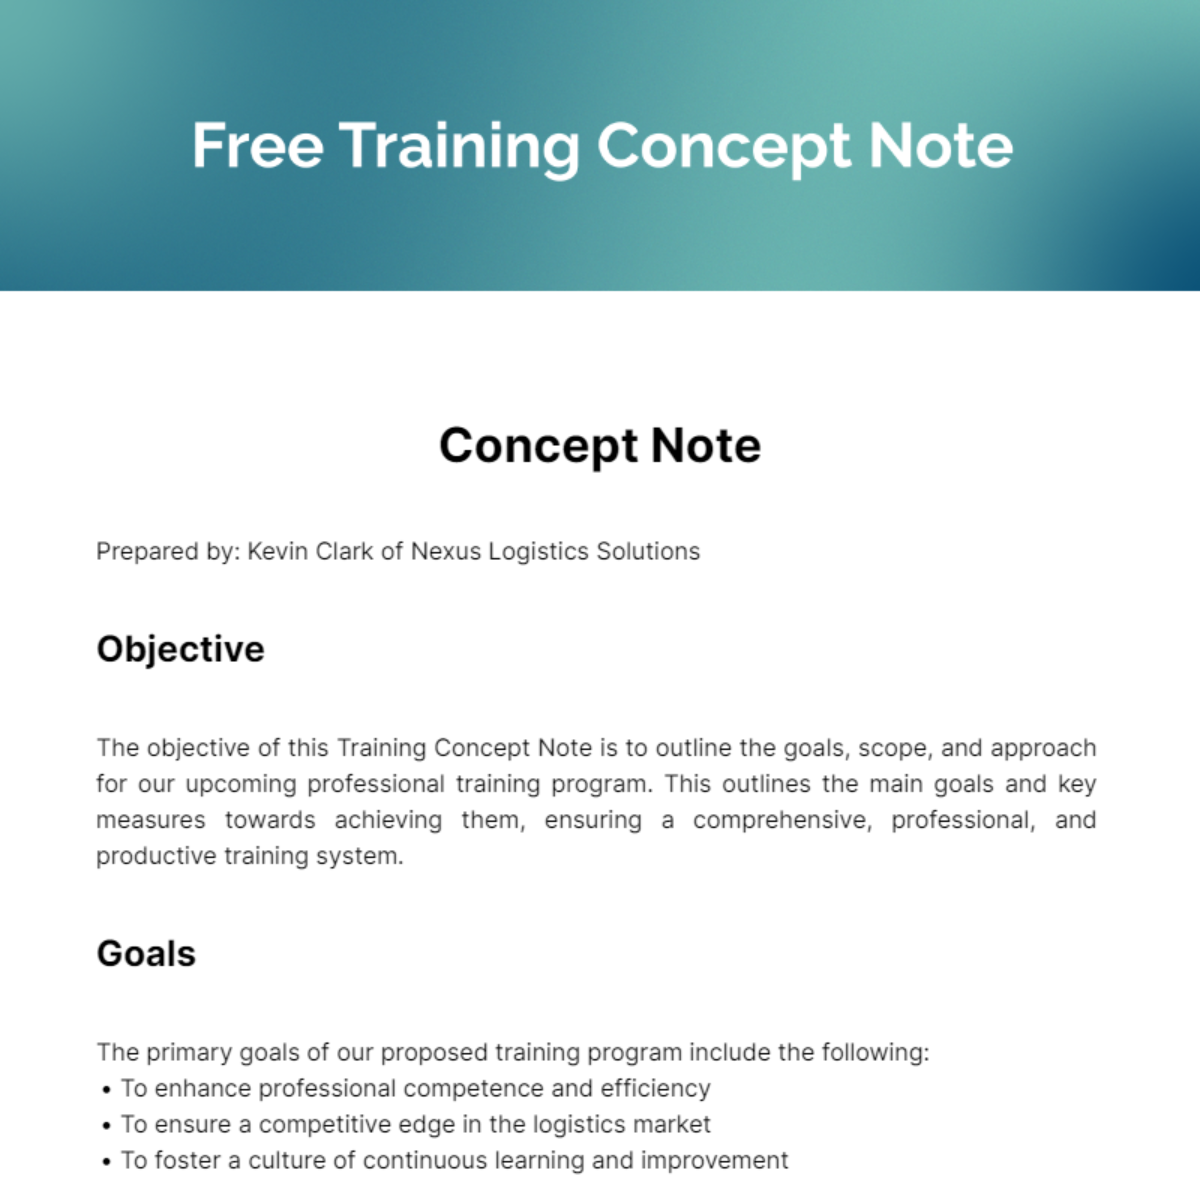 Free Training Concept Note Template